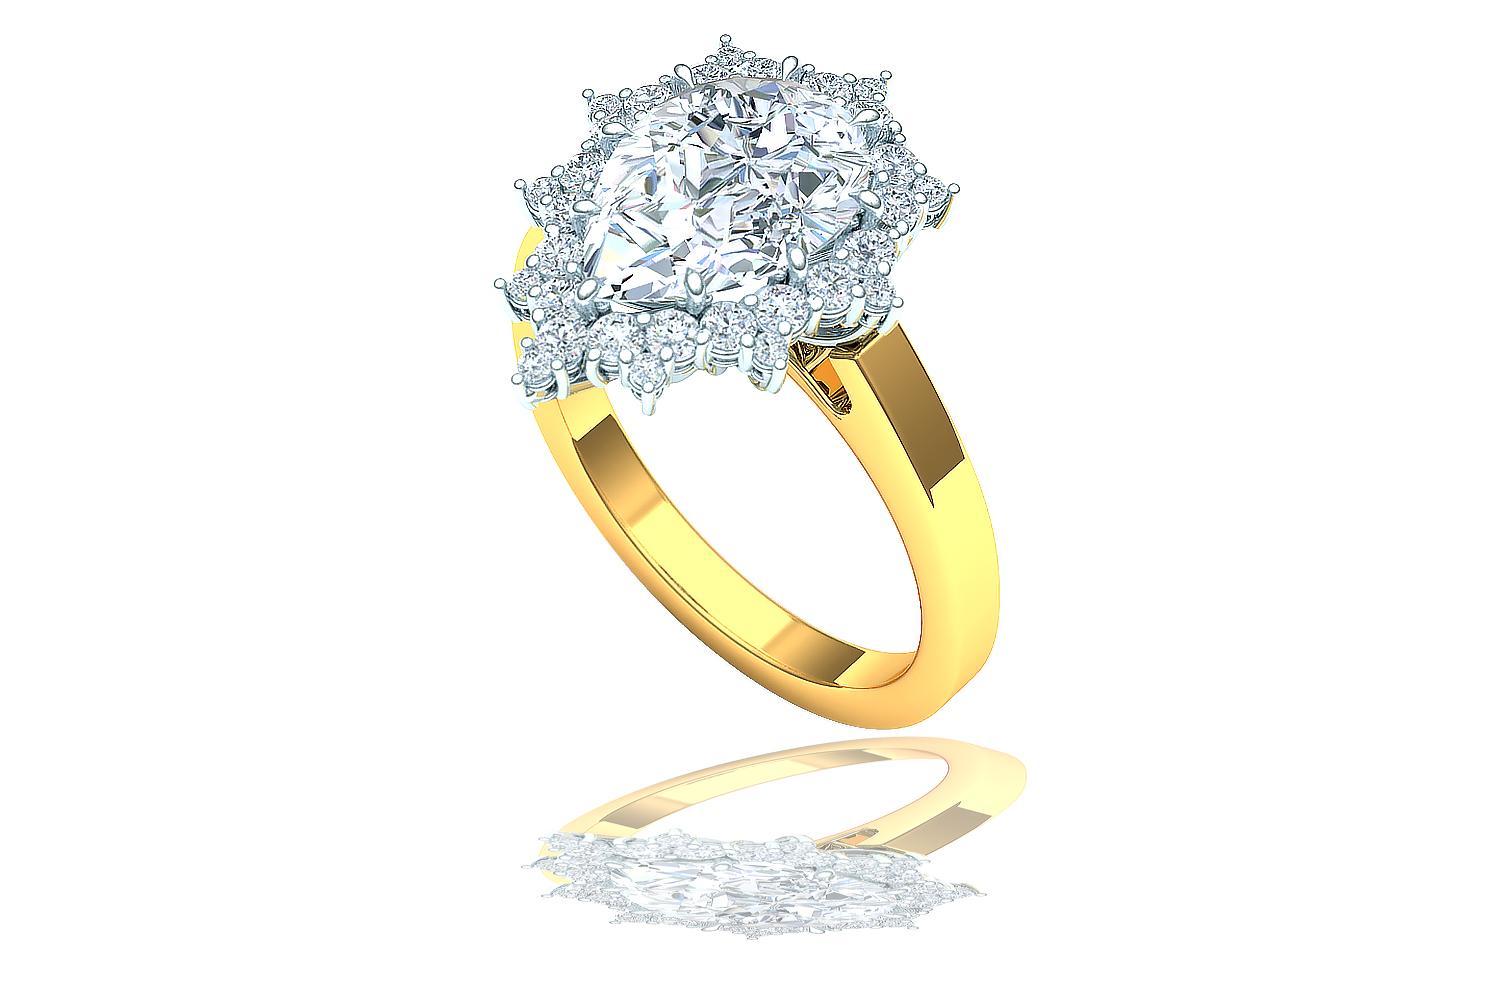 1.5 carat pear shaped diamond ring with halo